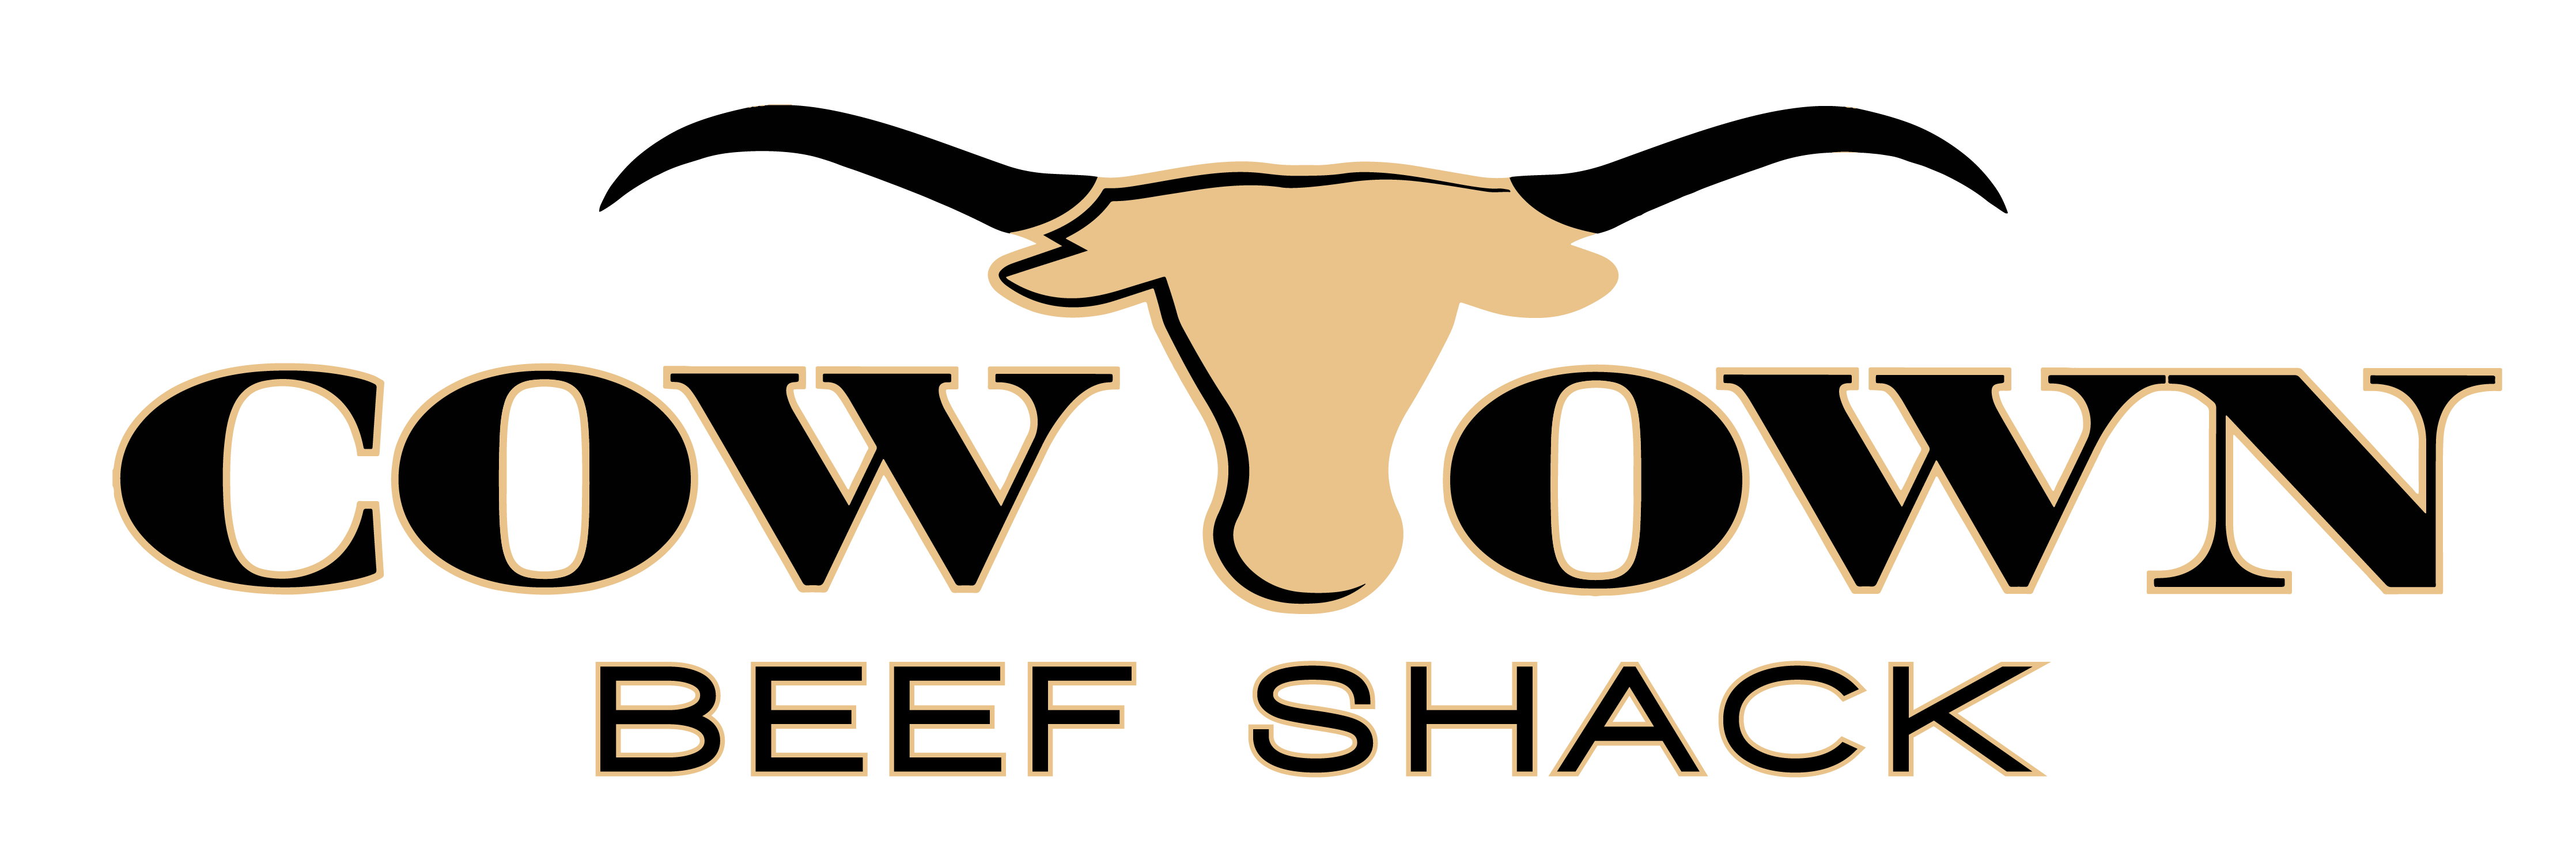 Cowtown Beef Shack